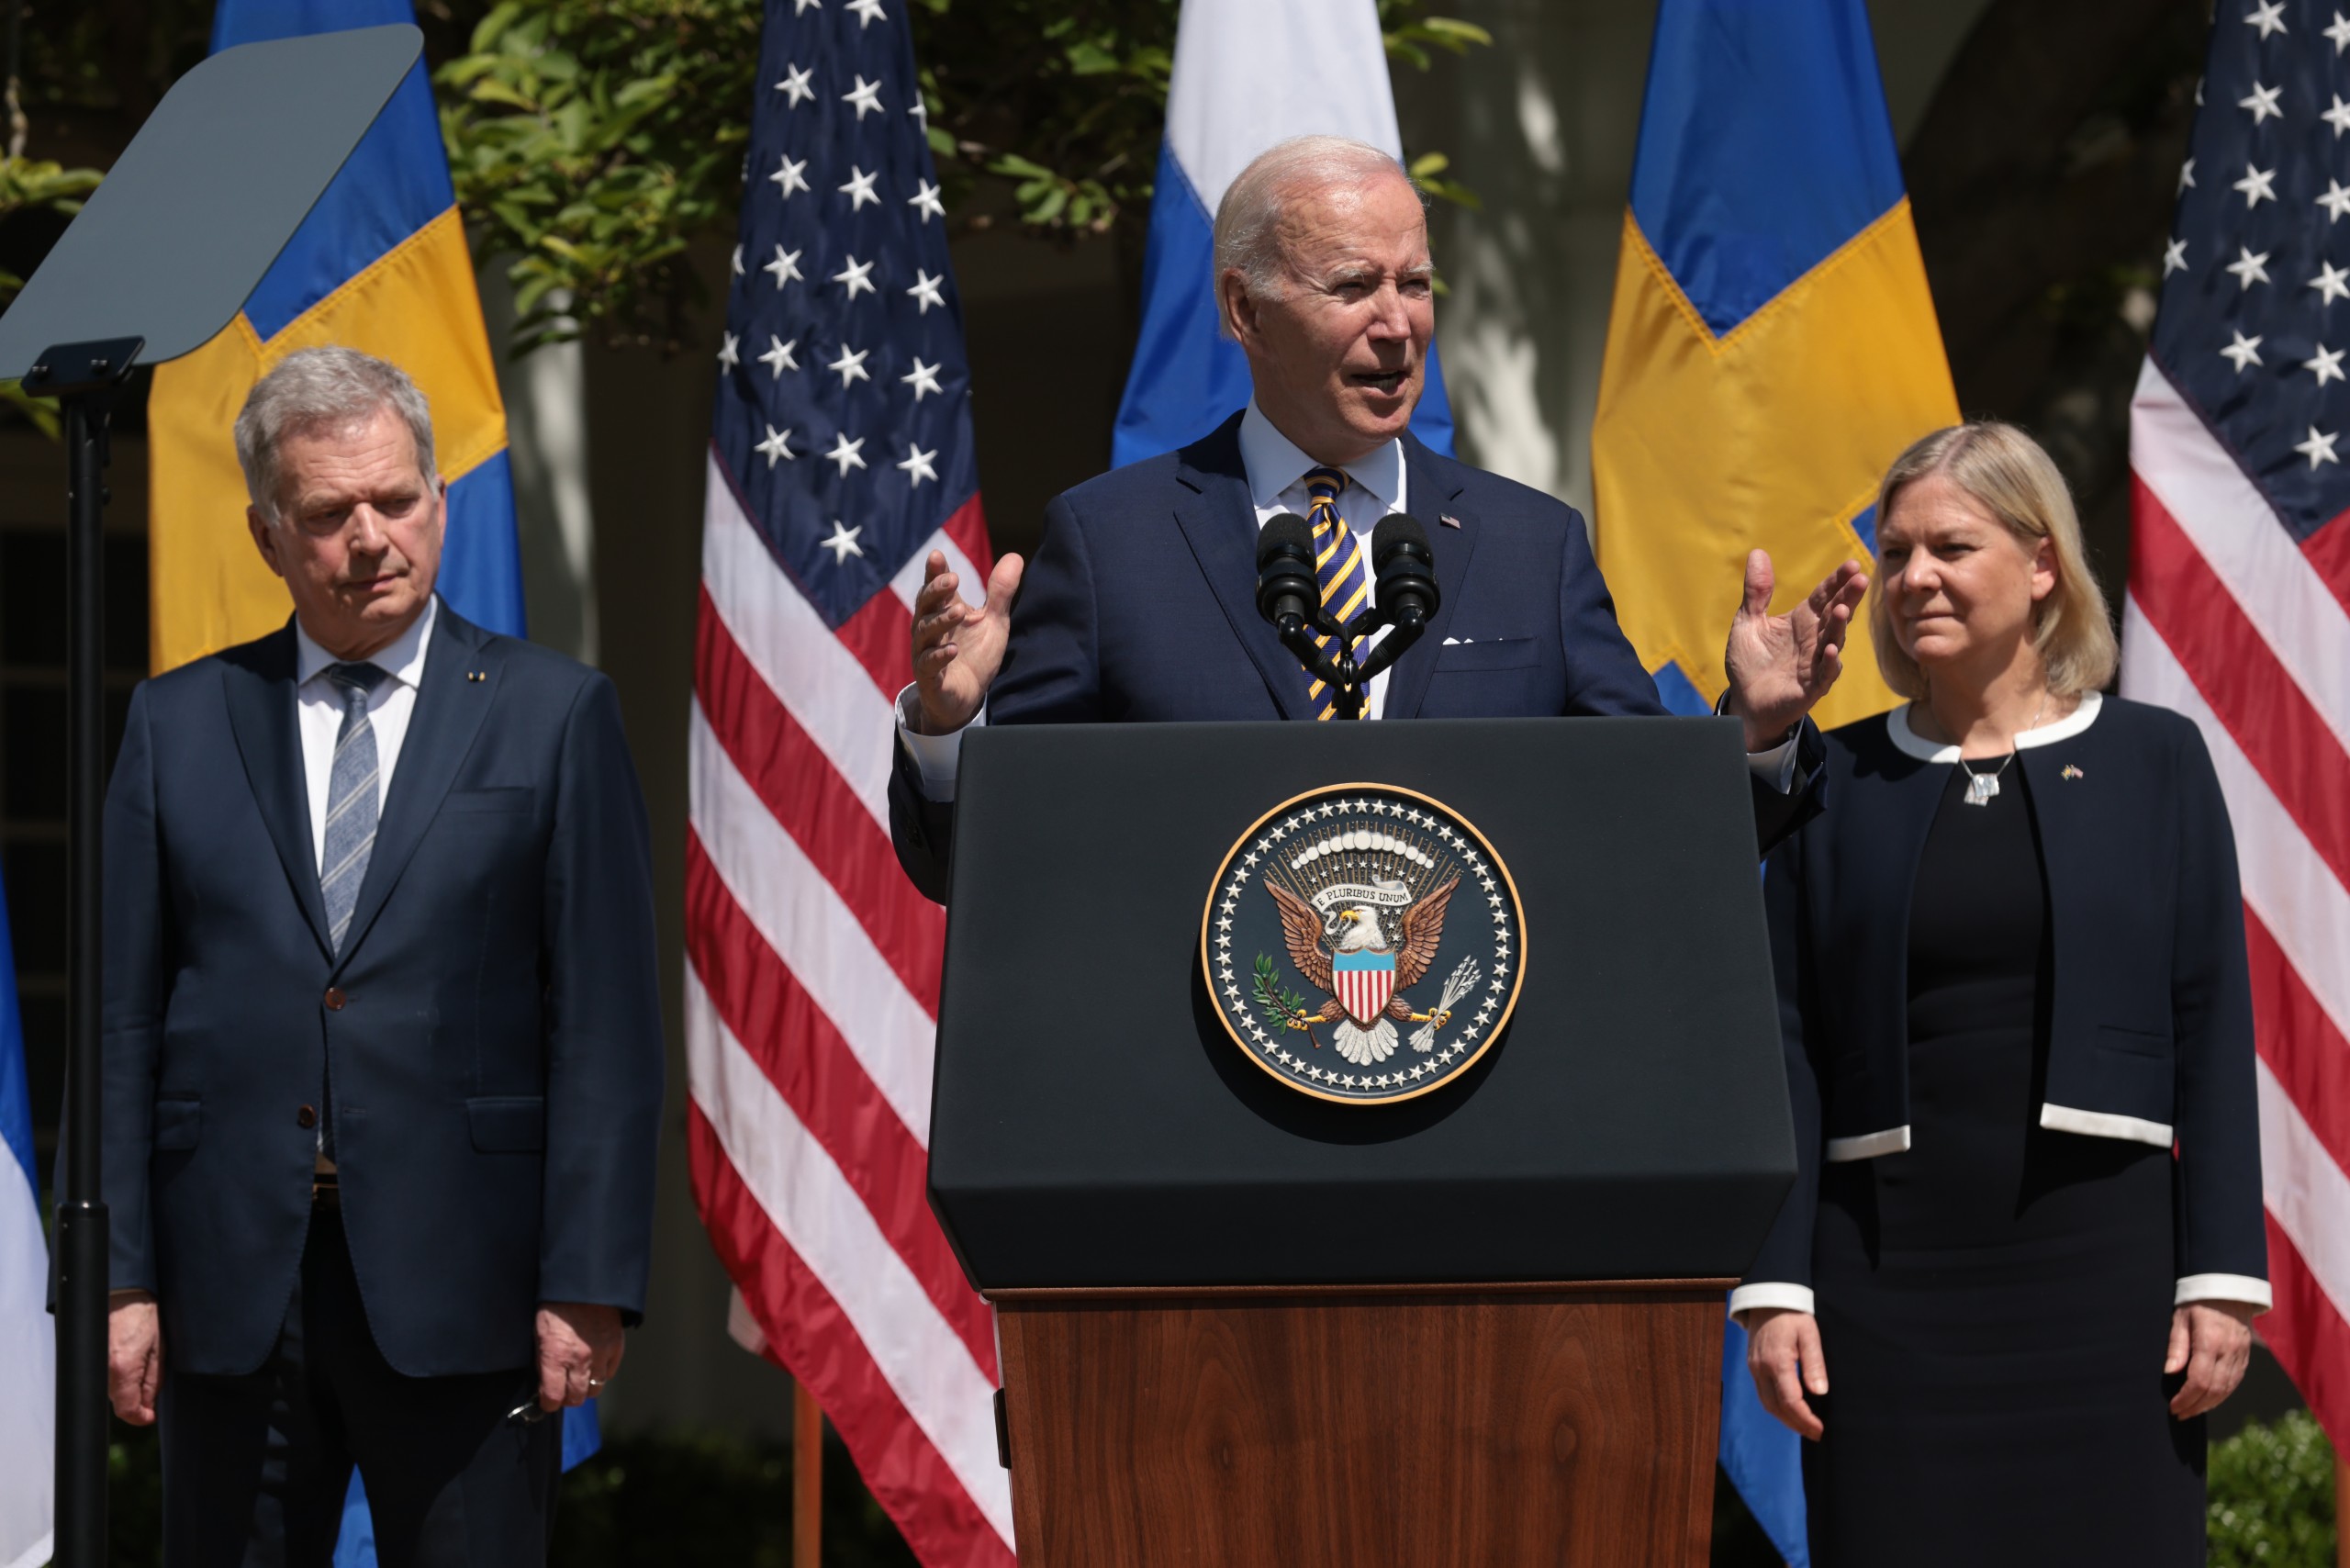 epa09958026 US President Joe Biden (C), Finnish President Sauli Niinisto (L) and Swedish Prime Minister Magdalena Andersson deliver brief remarks in the Rose Garden of the White House in Washington , DC, USA, 19 May 2022. Swedish Prime Minister Andersson and Finnish President Niinisto are visiting at the White House following the countries' applications for NATO membership as a result of Russia's invasion of Ukraine.  EPA/OLIVER CONTRERAS / POOL